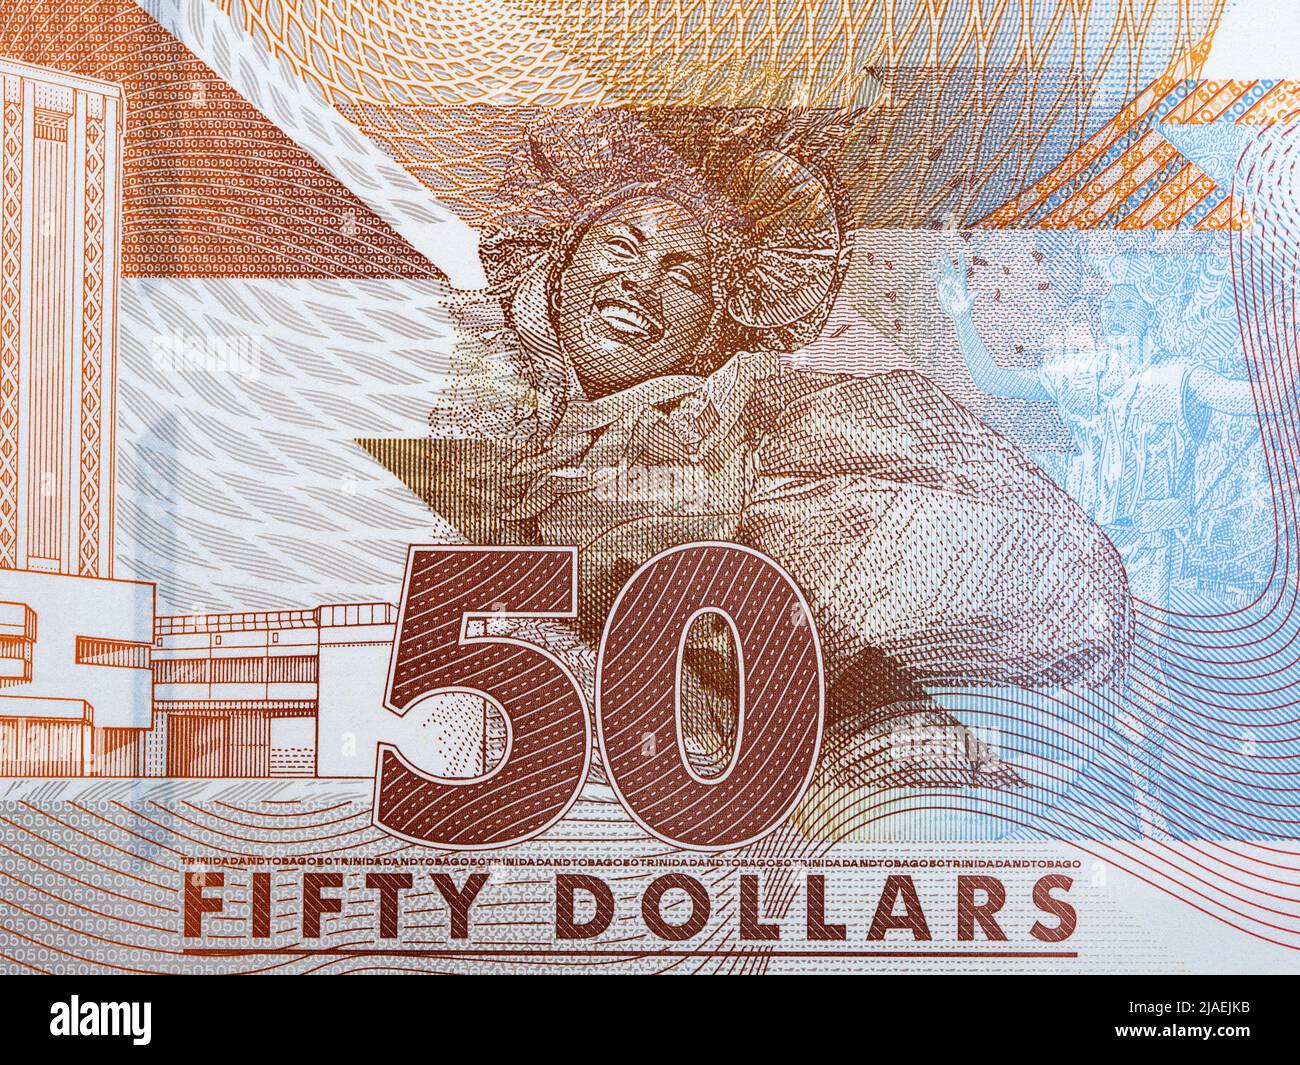 Dancer from Trinidad and Tobago money - Dollars Stock Photo